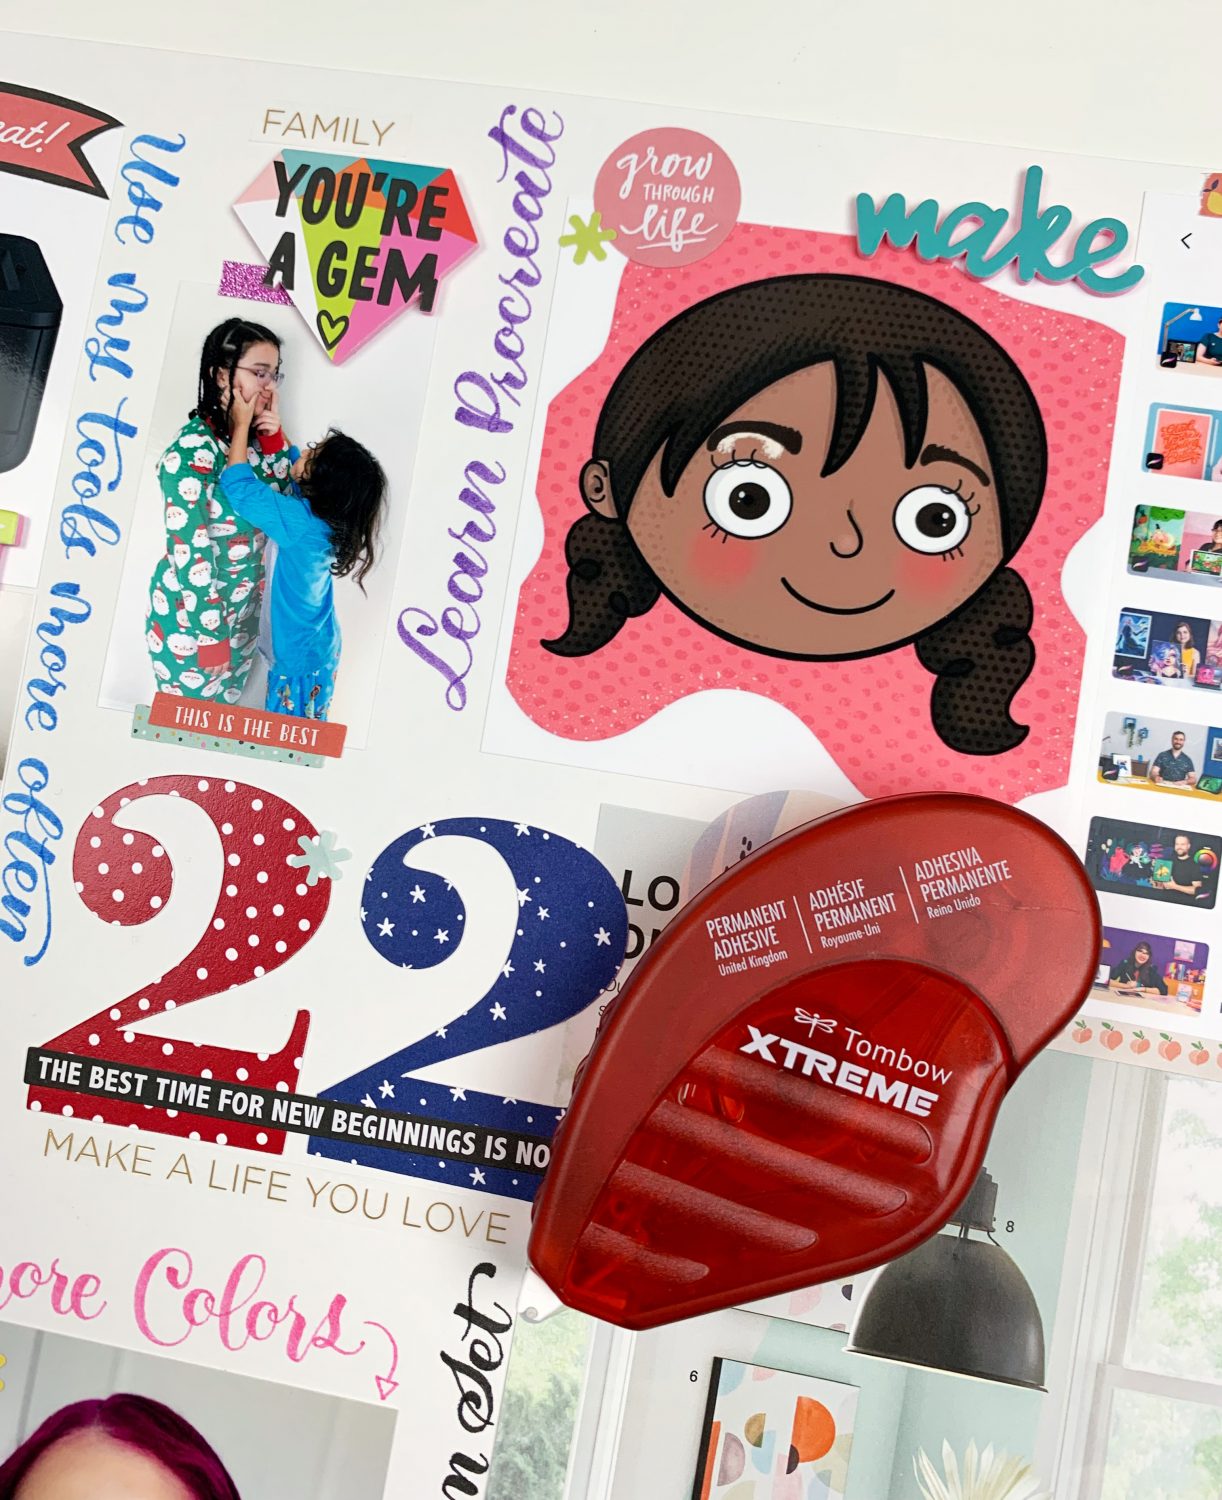 Secure the images of your vision board using the Tombow Xtreme Adhesive. #tombow #visionboard